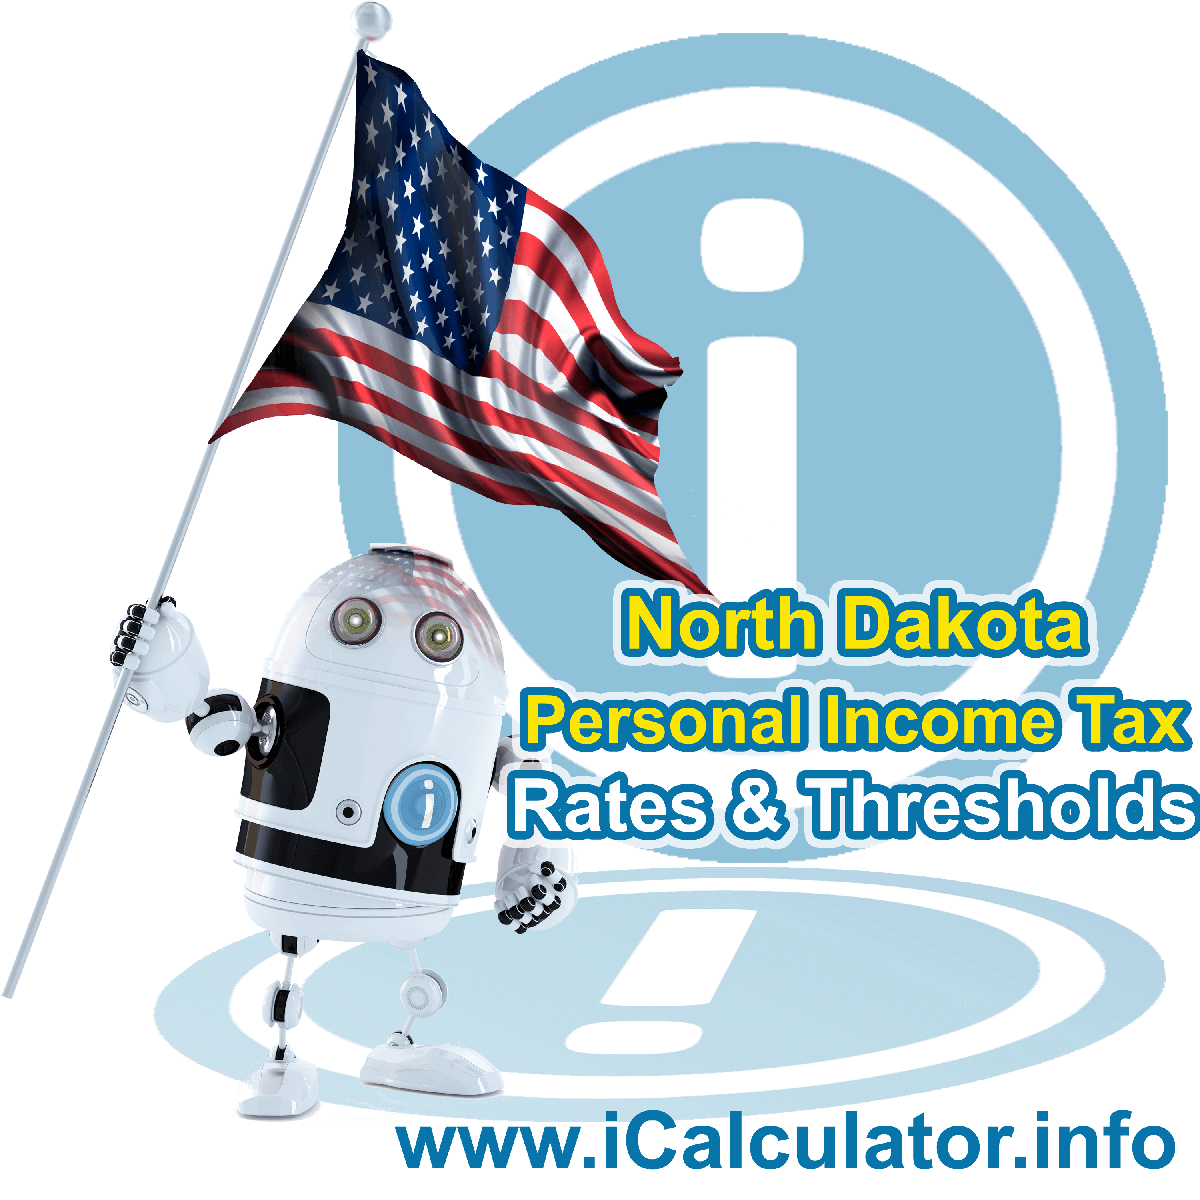 North Dakota State Tax Tables 2016. This image displays details of the North Dakota State Tax Tables for the 2016 tax return year which is provided in support of the 2016 US Tax Calculator